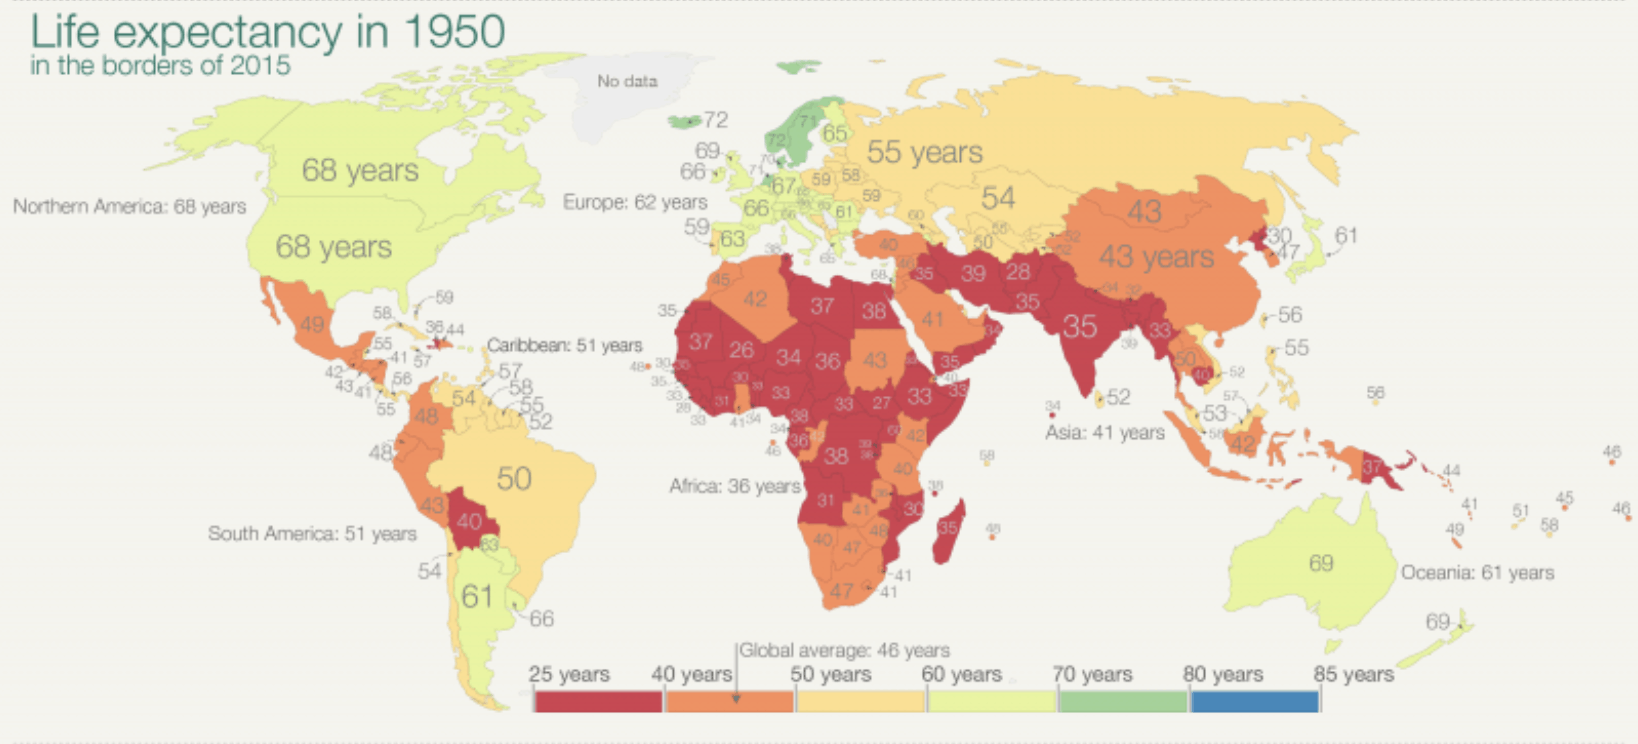 Life expectancy global map (1950)